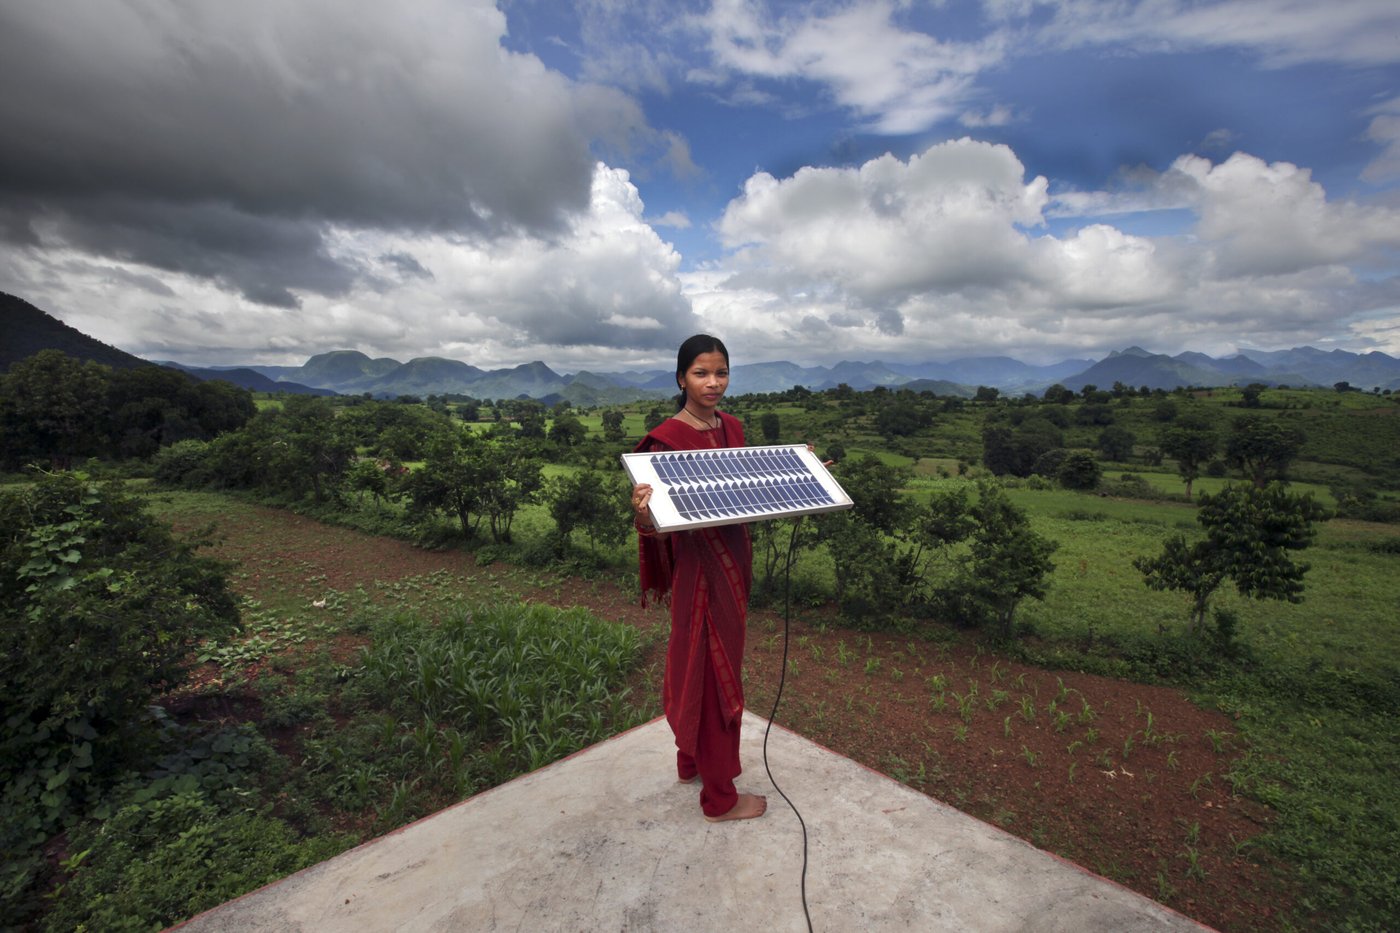 South Asian woman outdoors, holding small solar array